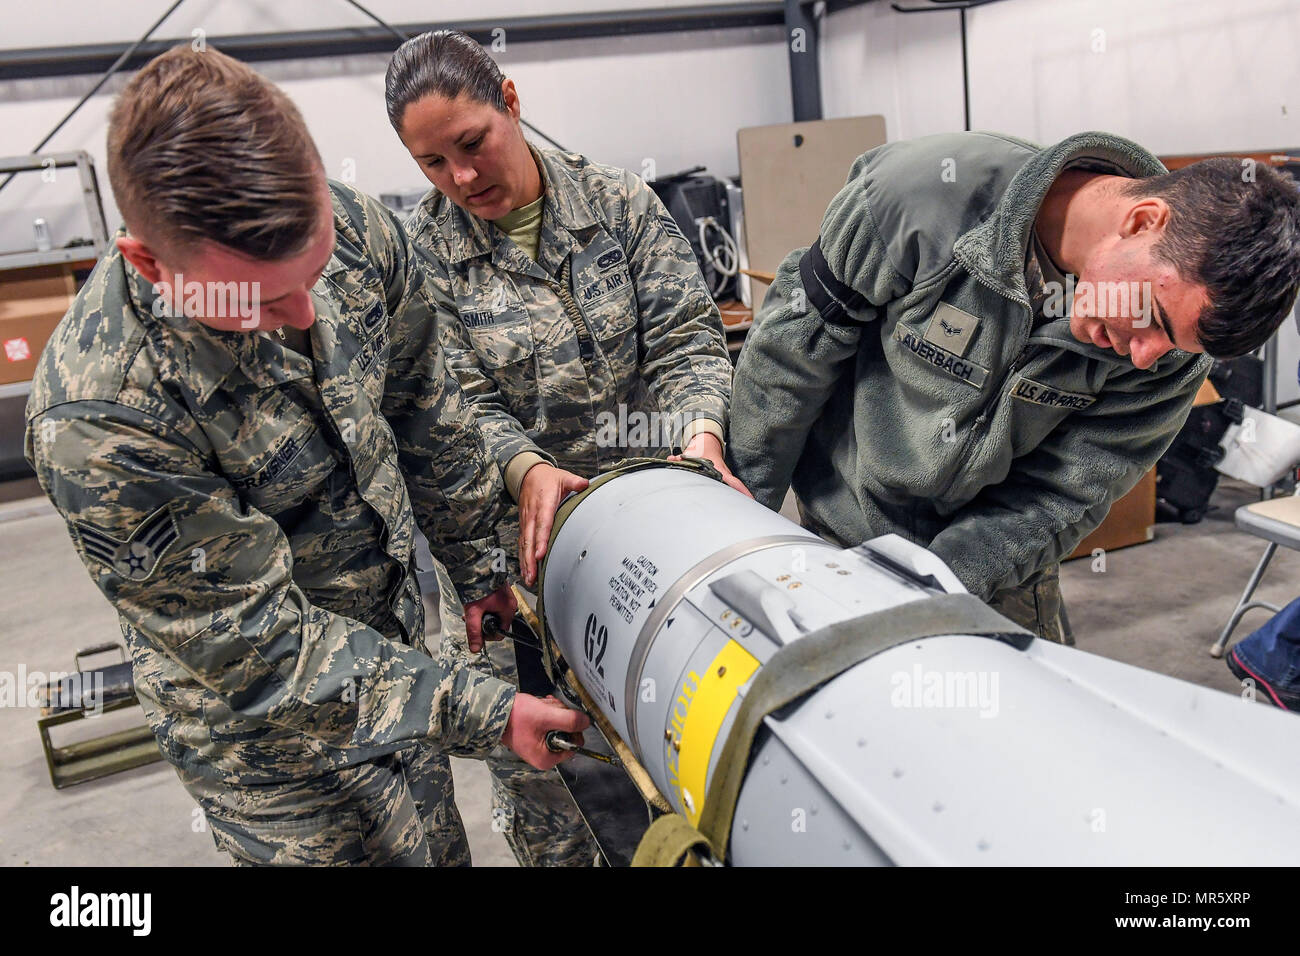 From the left, Senior Airman Troy Praisner, Senior Airman Lauren Smith and Airman 1st Class Anthony Auerbach, all from the 23rd Equipment Maintenance Squadron, Moody Air Force Base, Georgia, remove the guidance control system from an AGM-65 Maverick air-to-surface guided missile at Hill Air Force Base, Utah, April 26. The Airmen participated in Combat Hammer, an air-to-ground weapons evaluation exercise conducted by the 86th Fighter Weapons Squadron which collects and analyzes data on the performance of precision weapons and measures their suitability for use in combat.  (U.S. Air Force/Paul H Stock Photo